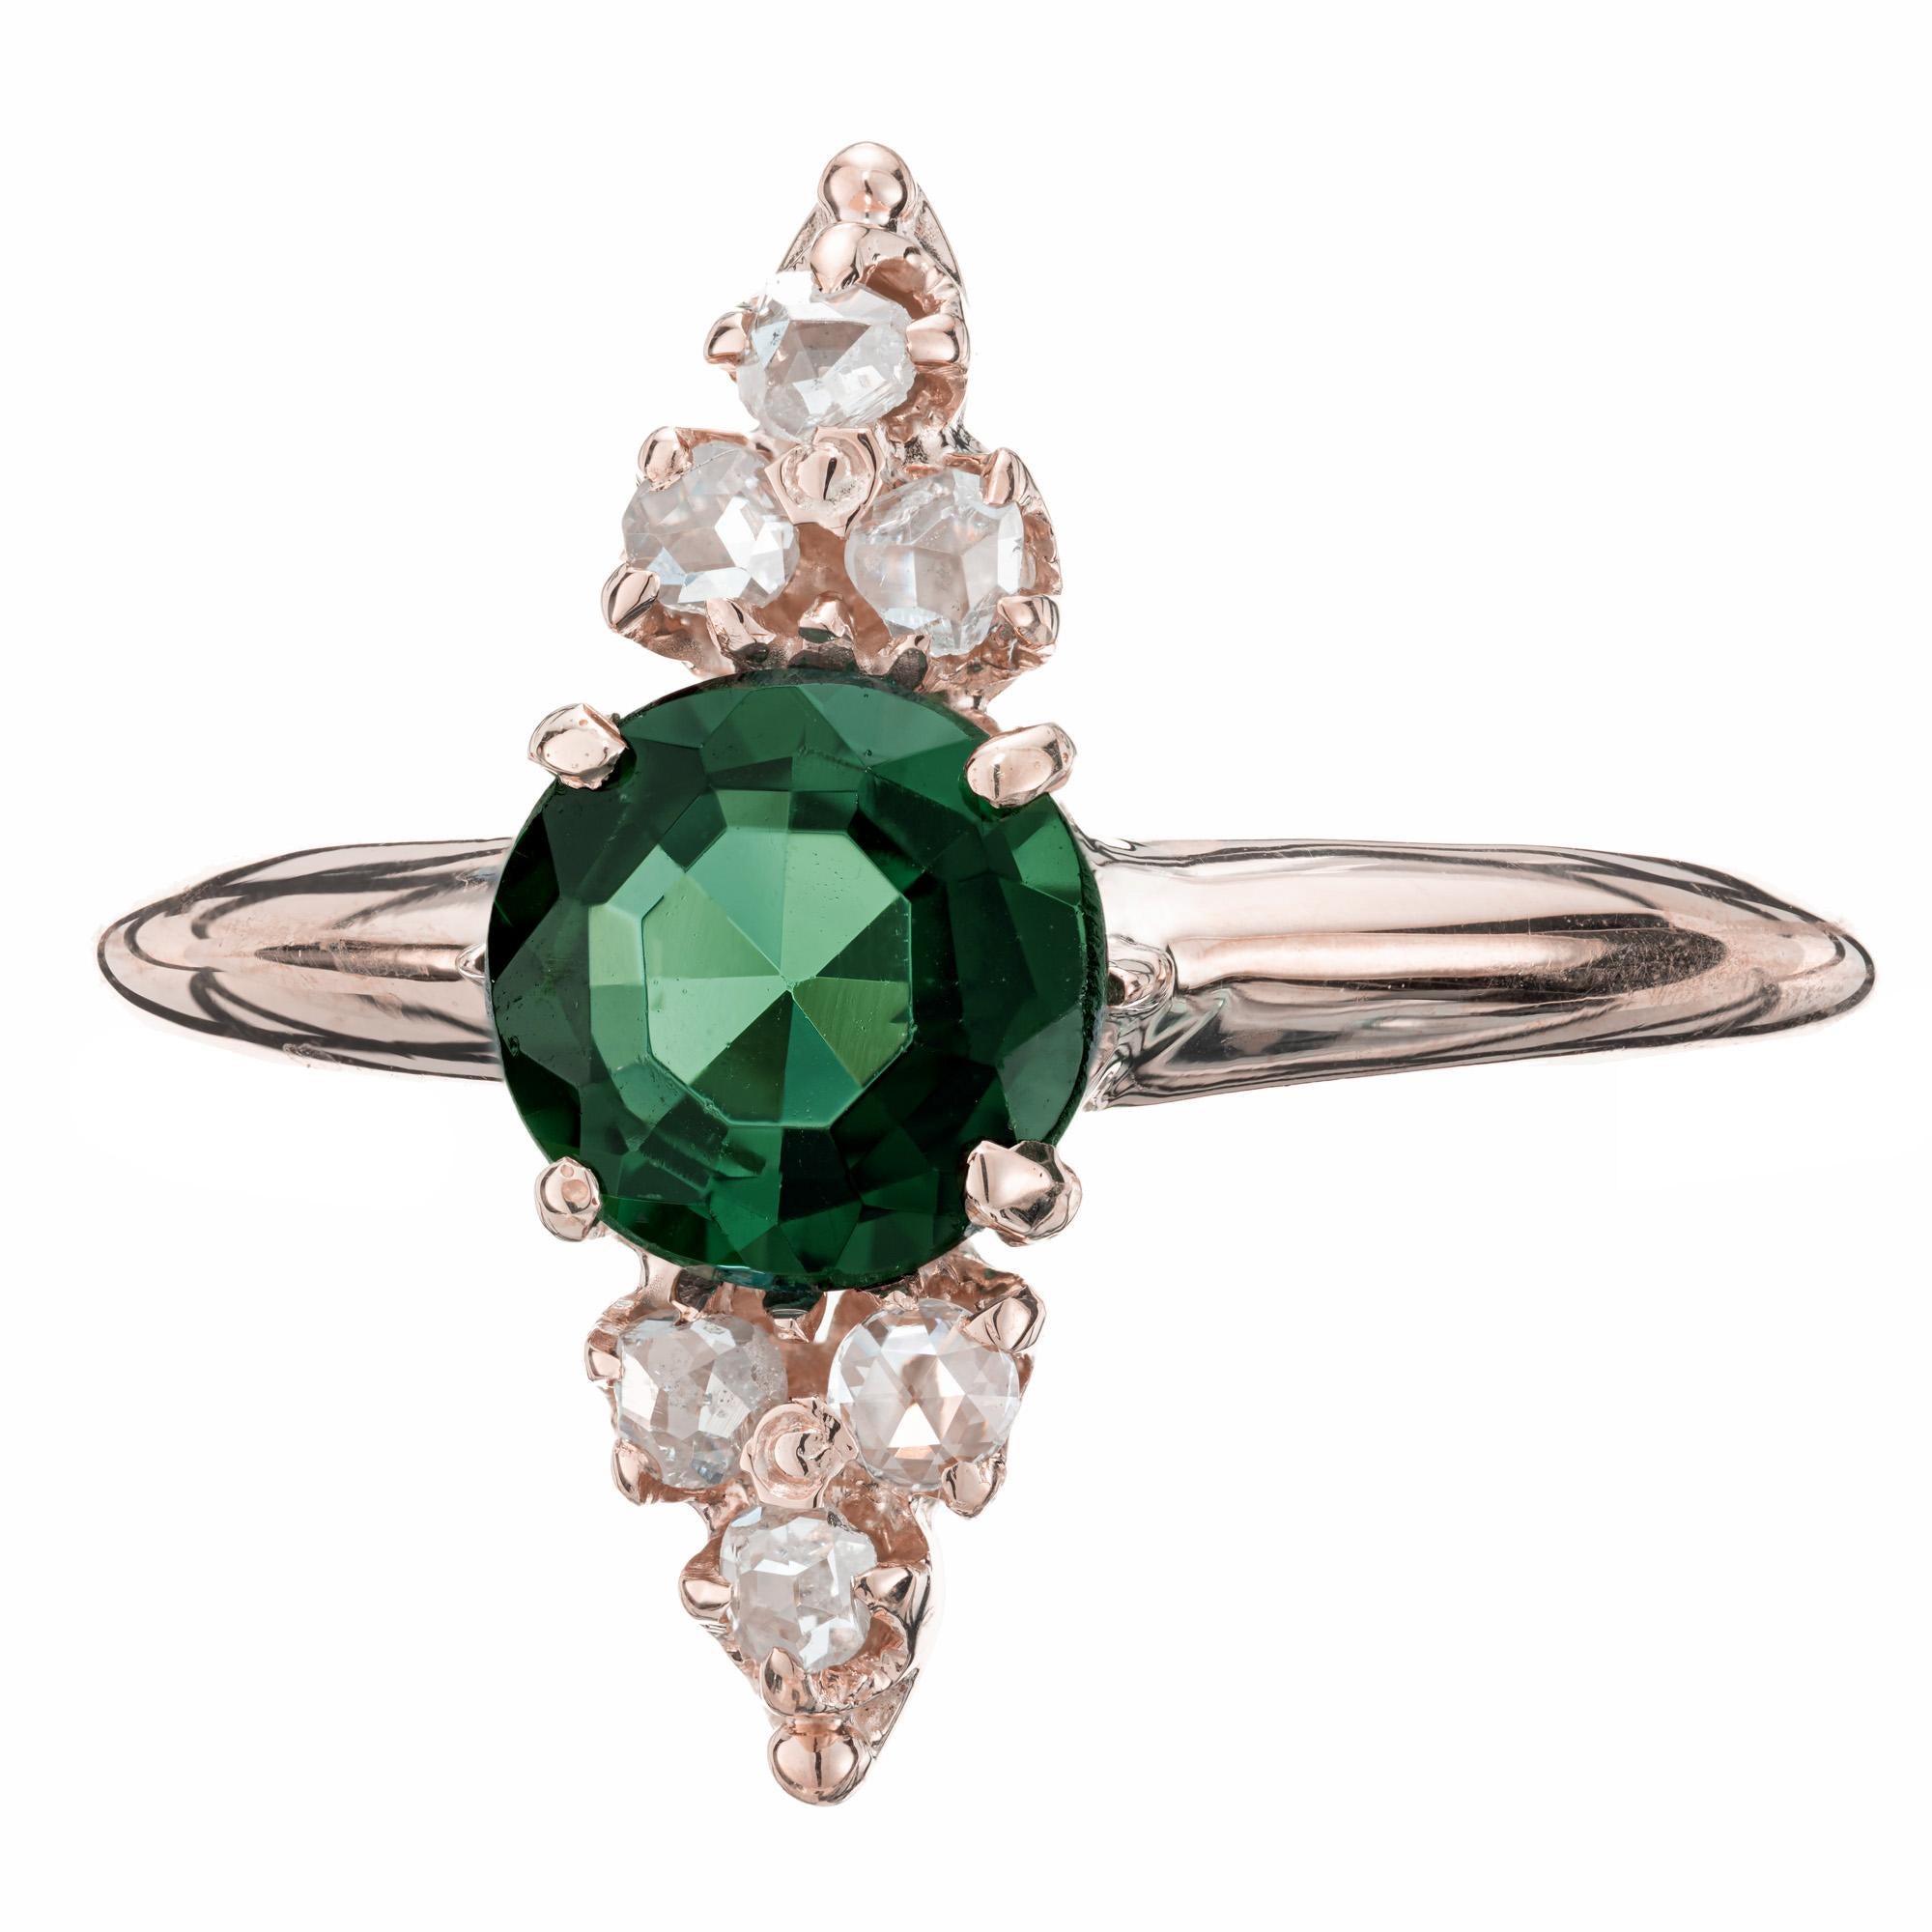 Late 1800's, Handmade tourmaline and diamond ring. 1 round eight sided tourmaline center stone with 3 rose cut accent diamonds on top and bottom of center stone. 14k rose gold setting. 

1 round 8 sided green tourmaline, VS approx. 1.00cts
6 rose